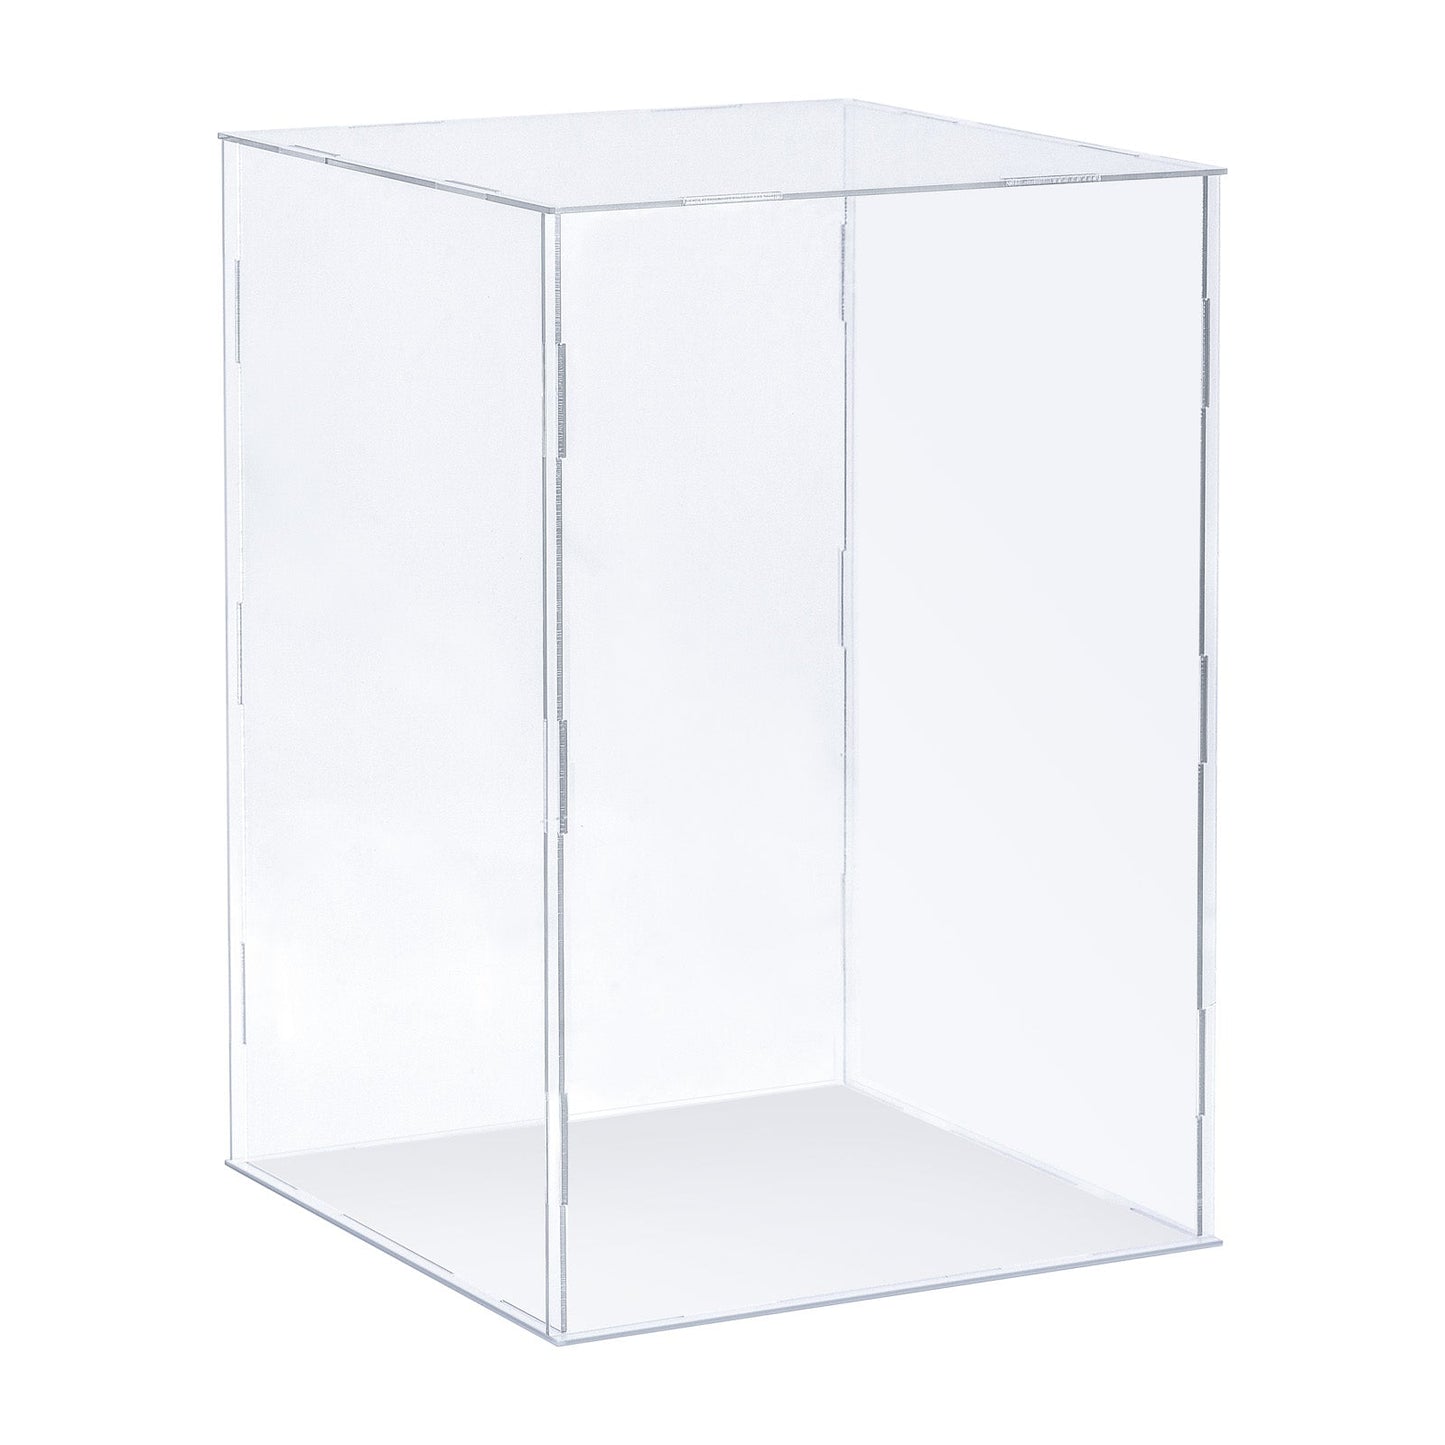 16.25 x 8 x 16.25 Display Case with 2 Shelves Clear Acrylic